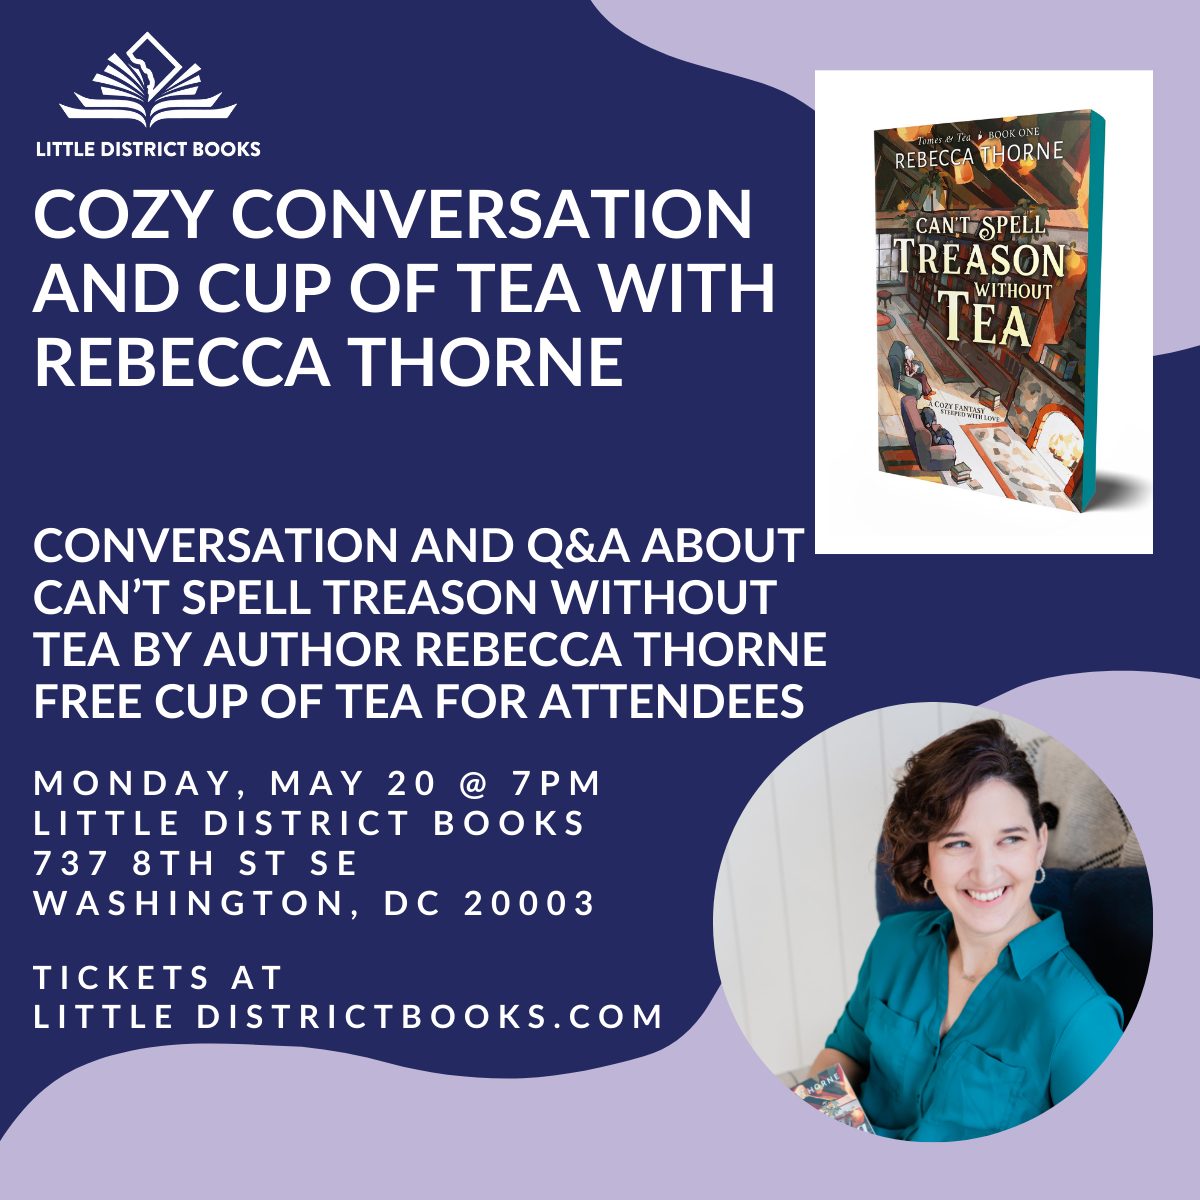 Cozy Conversation and Cup of Tea with Rebecca Thorne